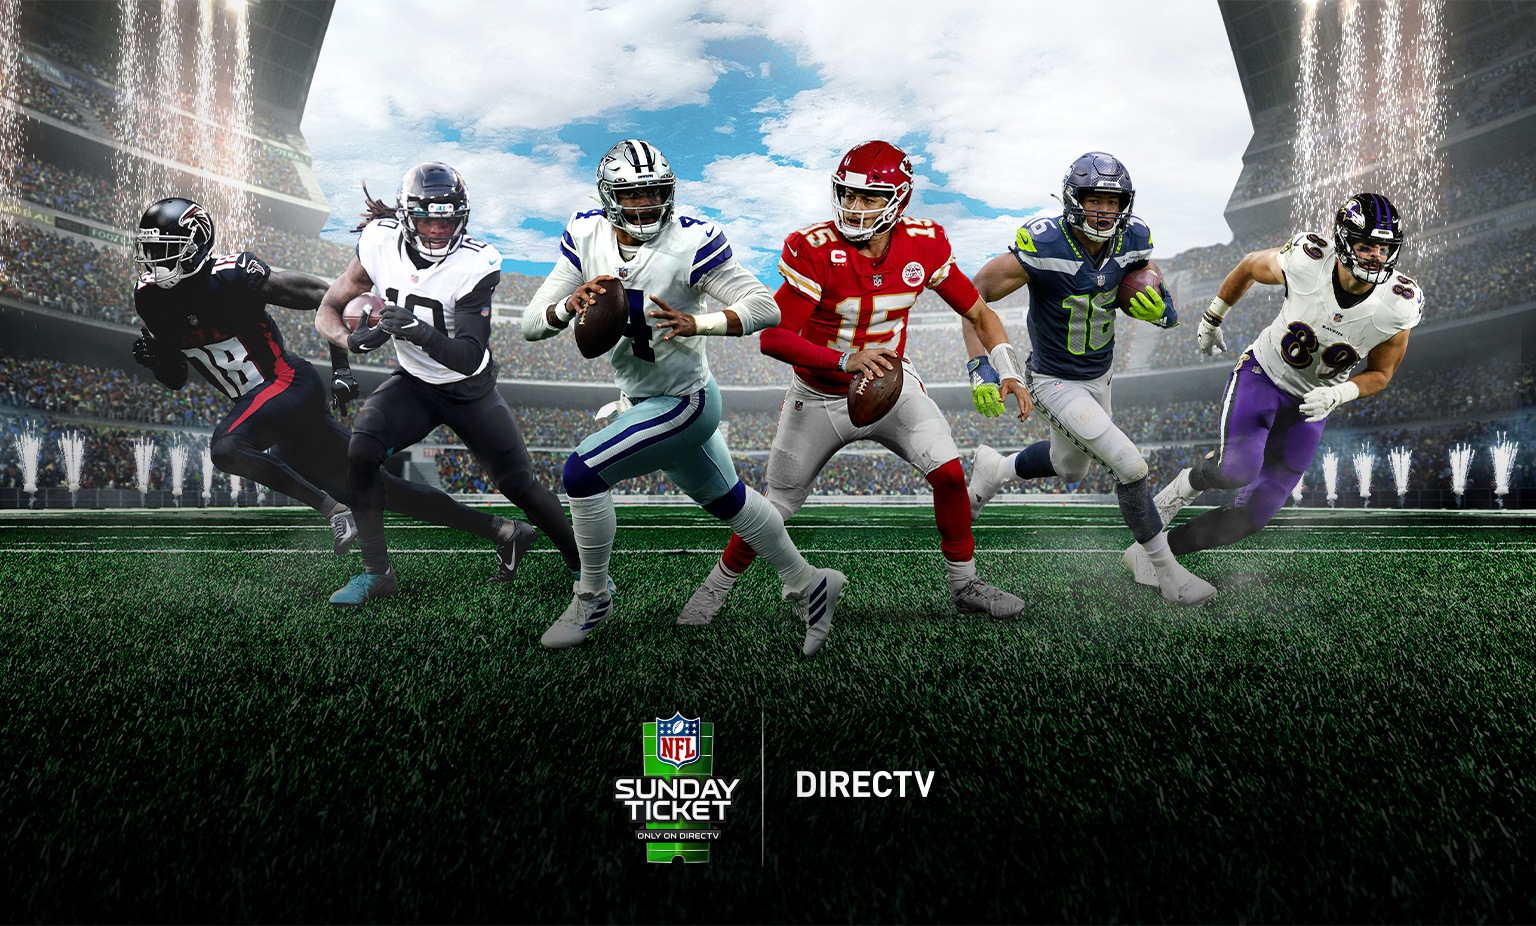 Nfl Sunday Ticket Military Factory Sale, SAVE 36% 